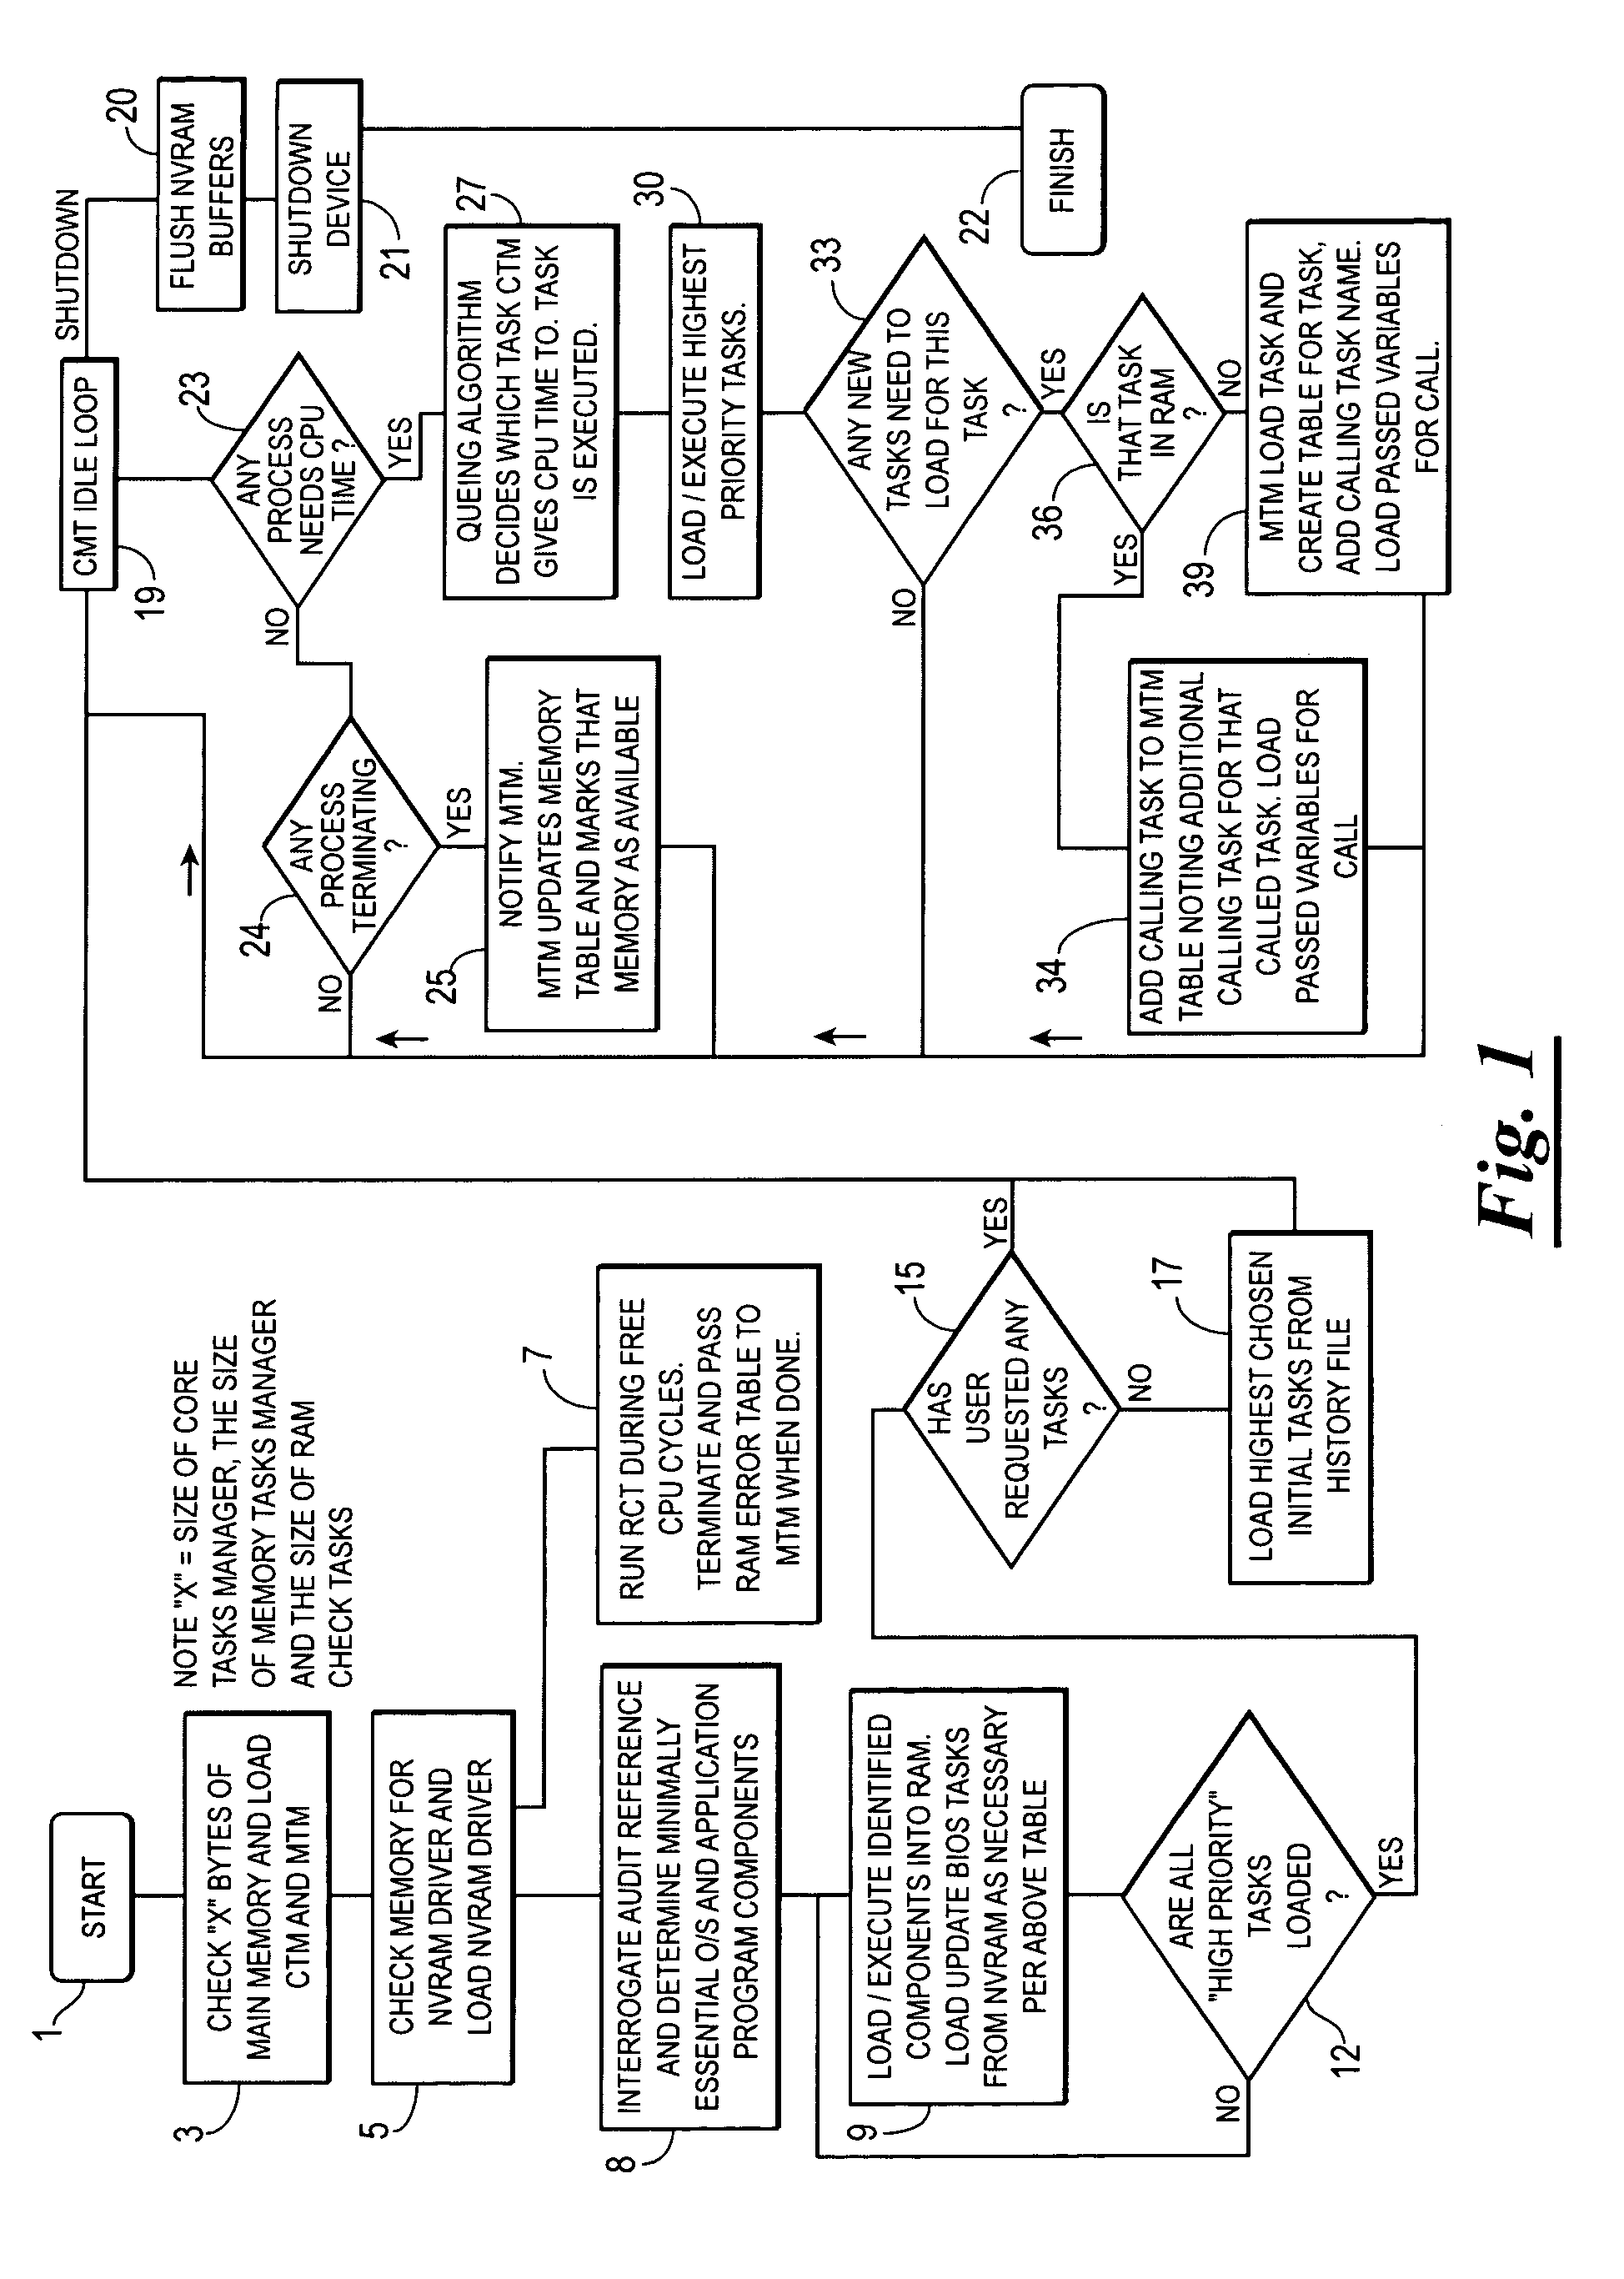 Method and apparatus to minimize computer apparatus initial program load and exit/shut down processing